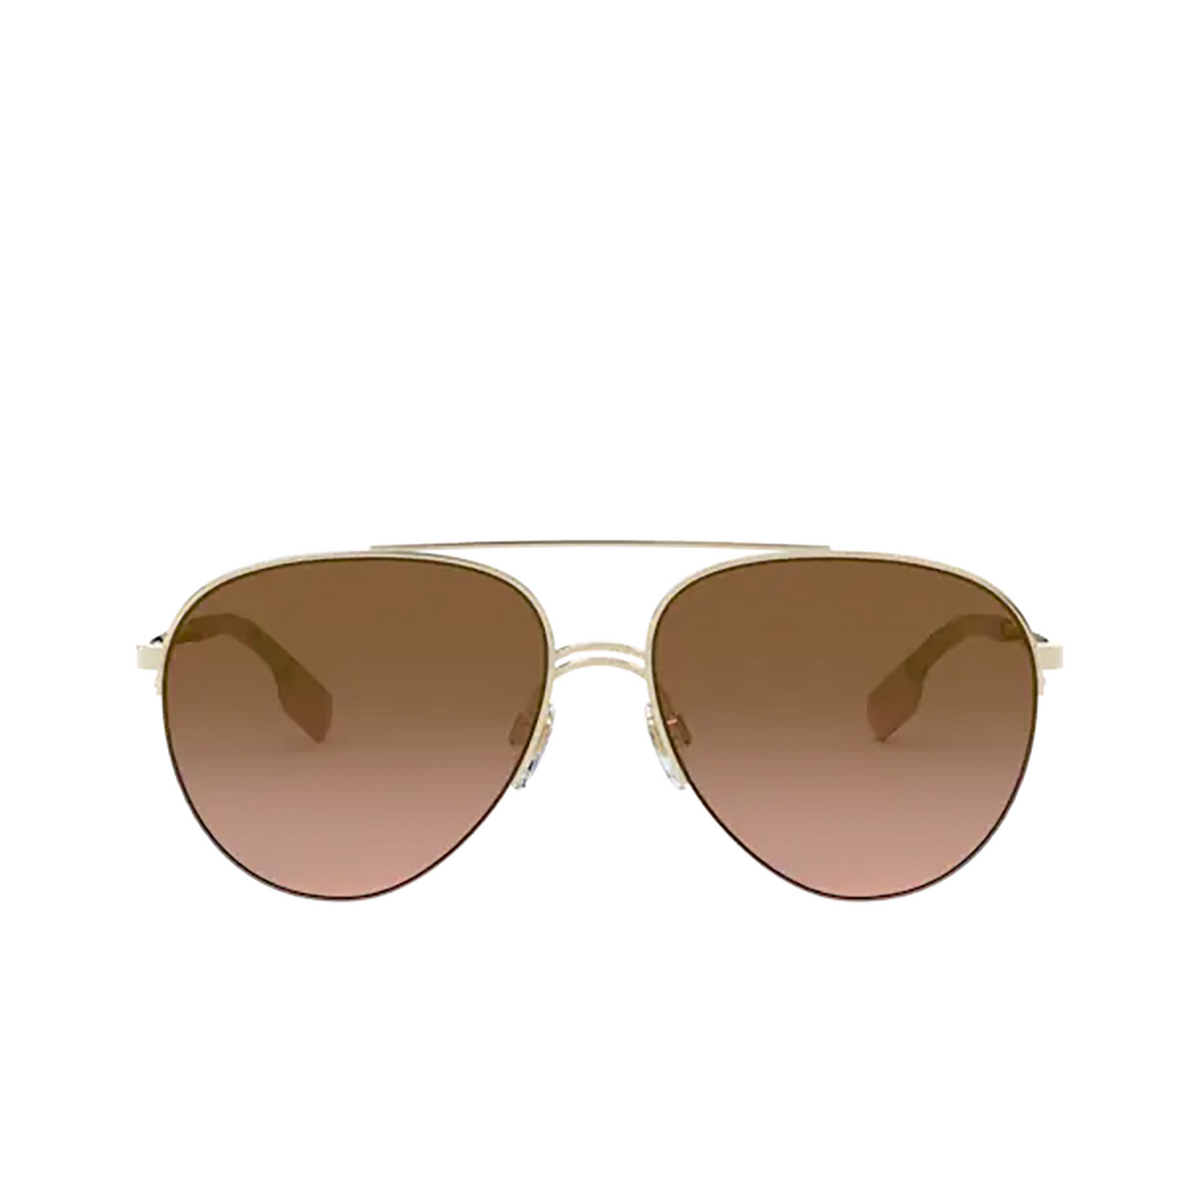 Burberry FERRY Sunglasses 110913 Light Gold - front view